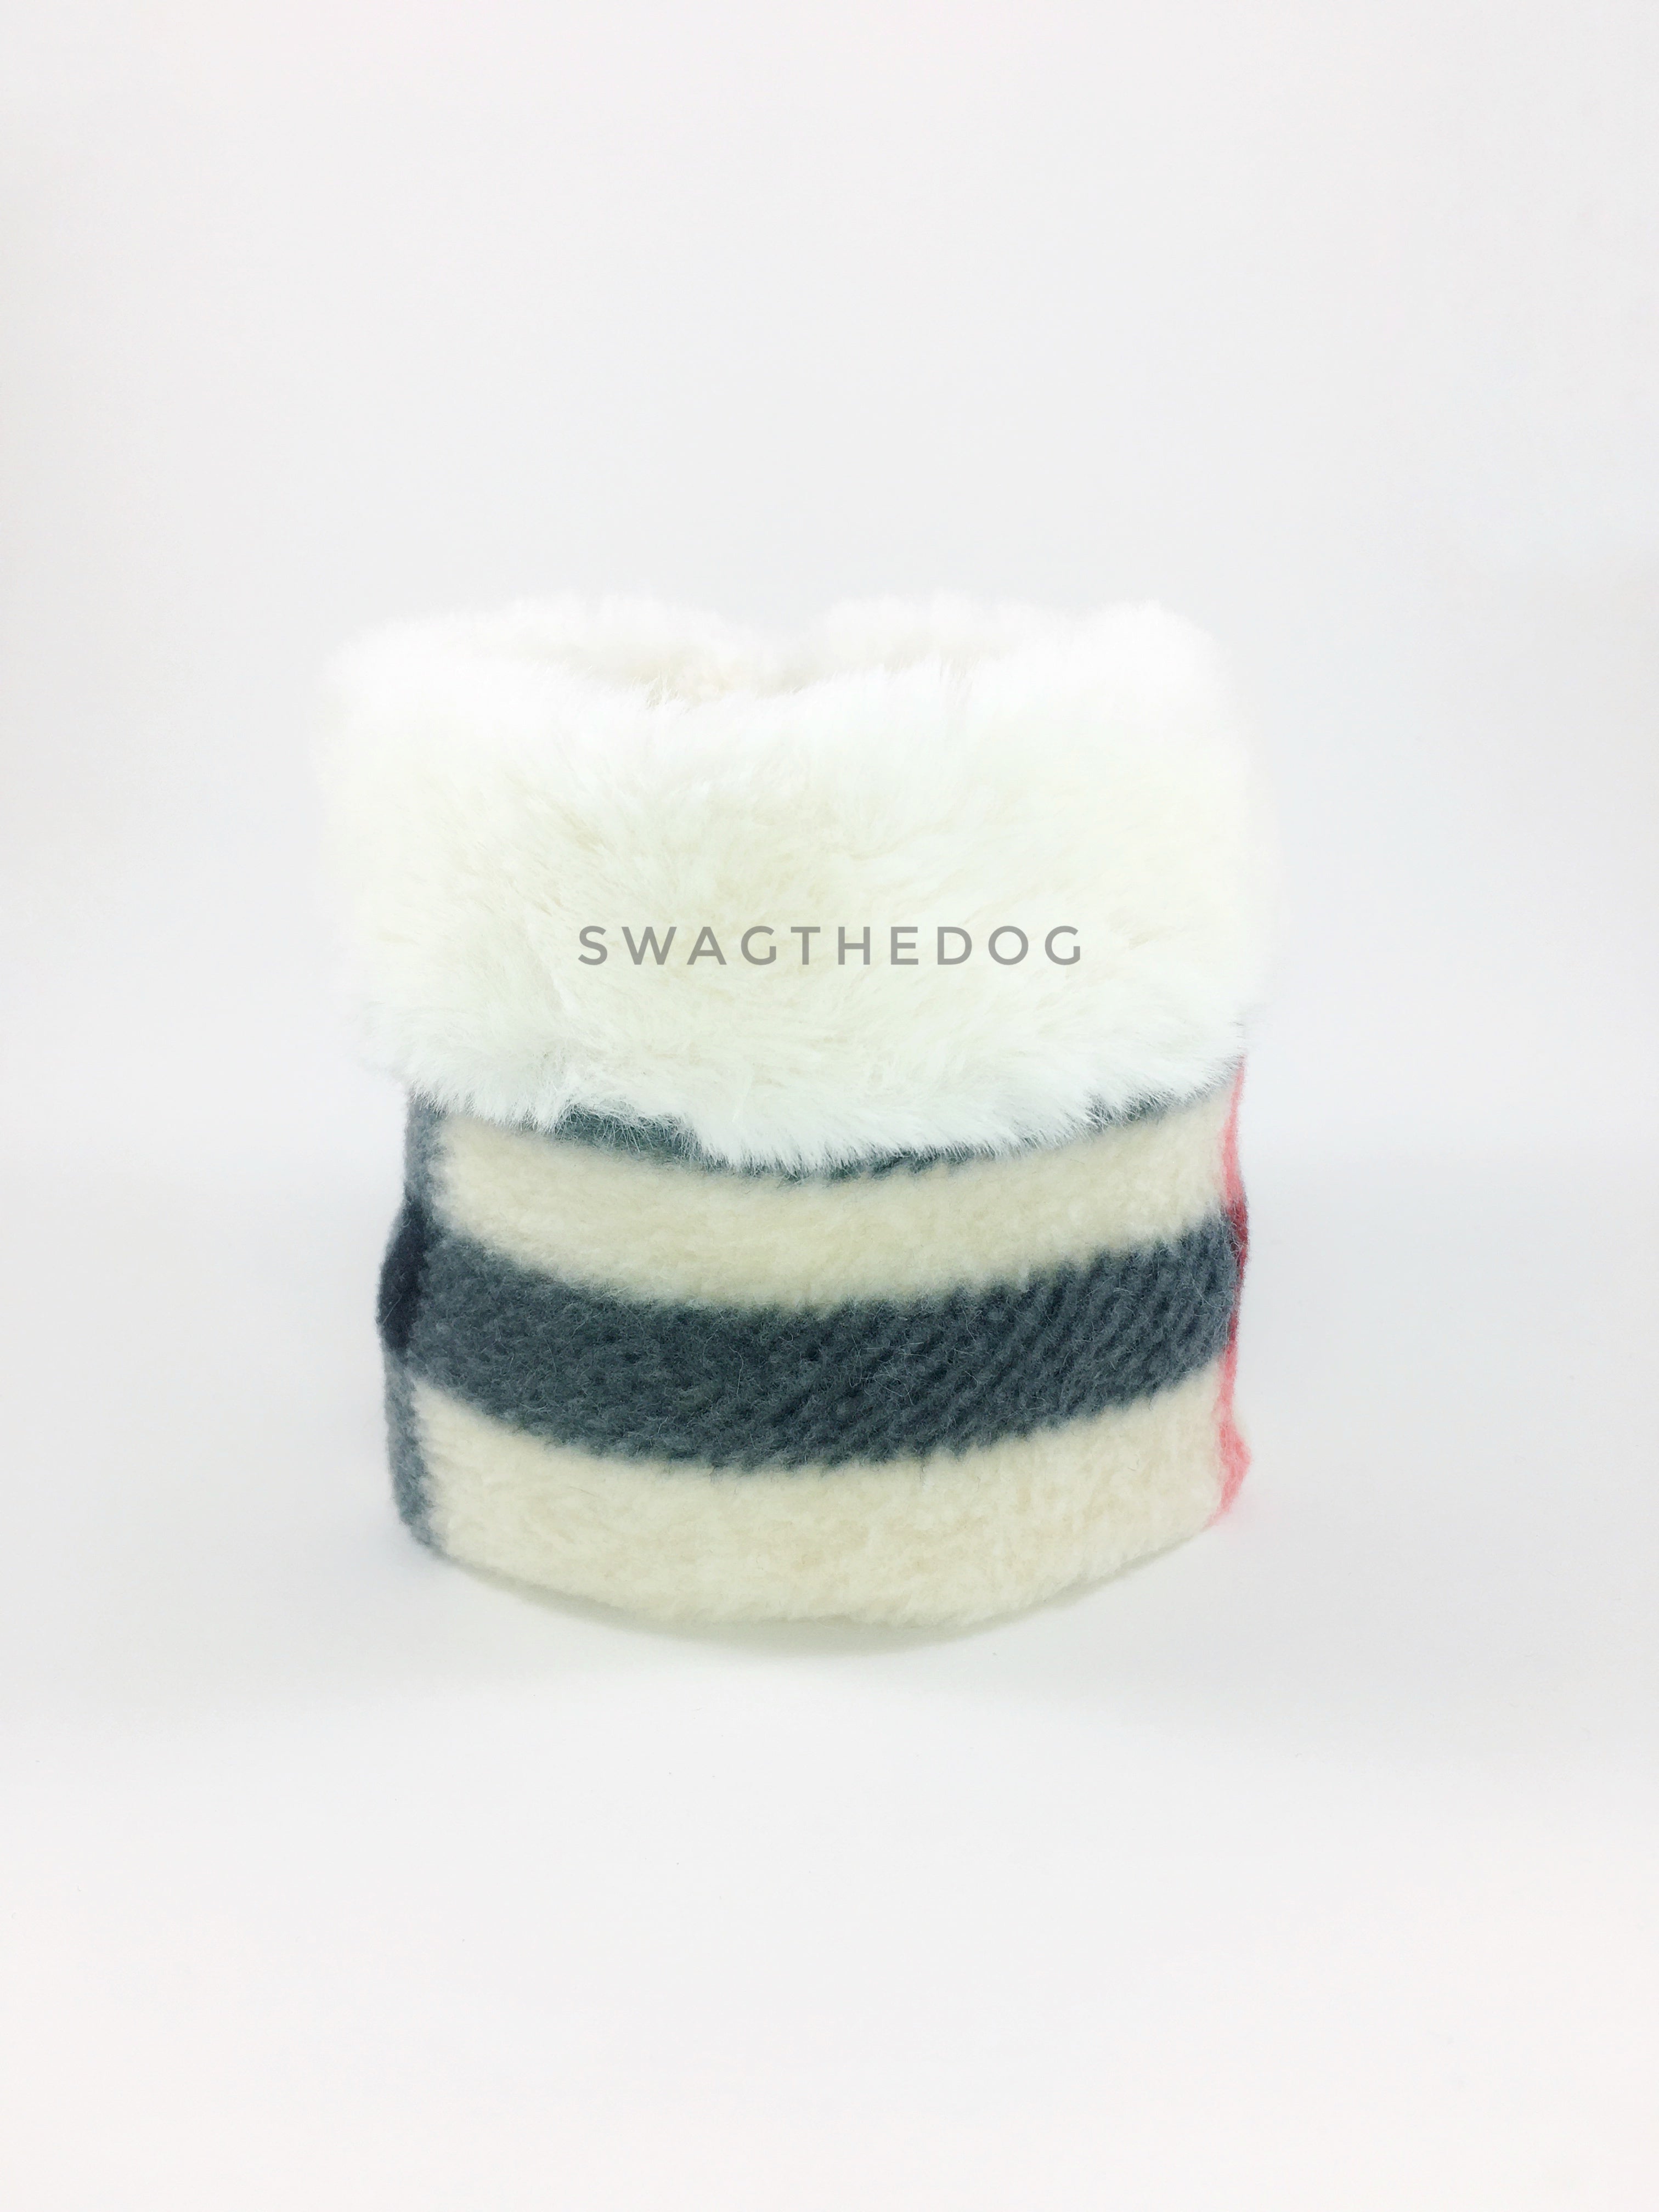 Furberry Swagsnood - Product Front View. Faux fur rolled up 1/3 of the snood and 2/3 with cream burberry print fleece